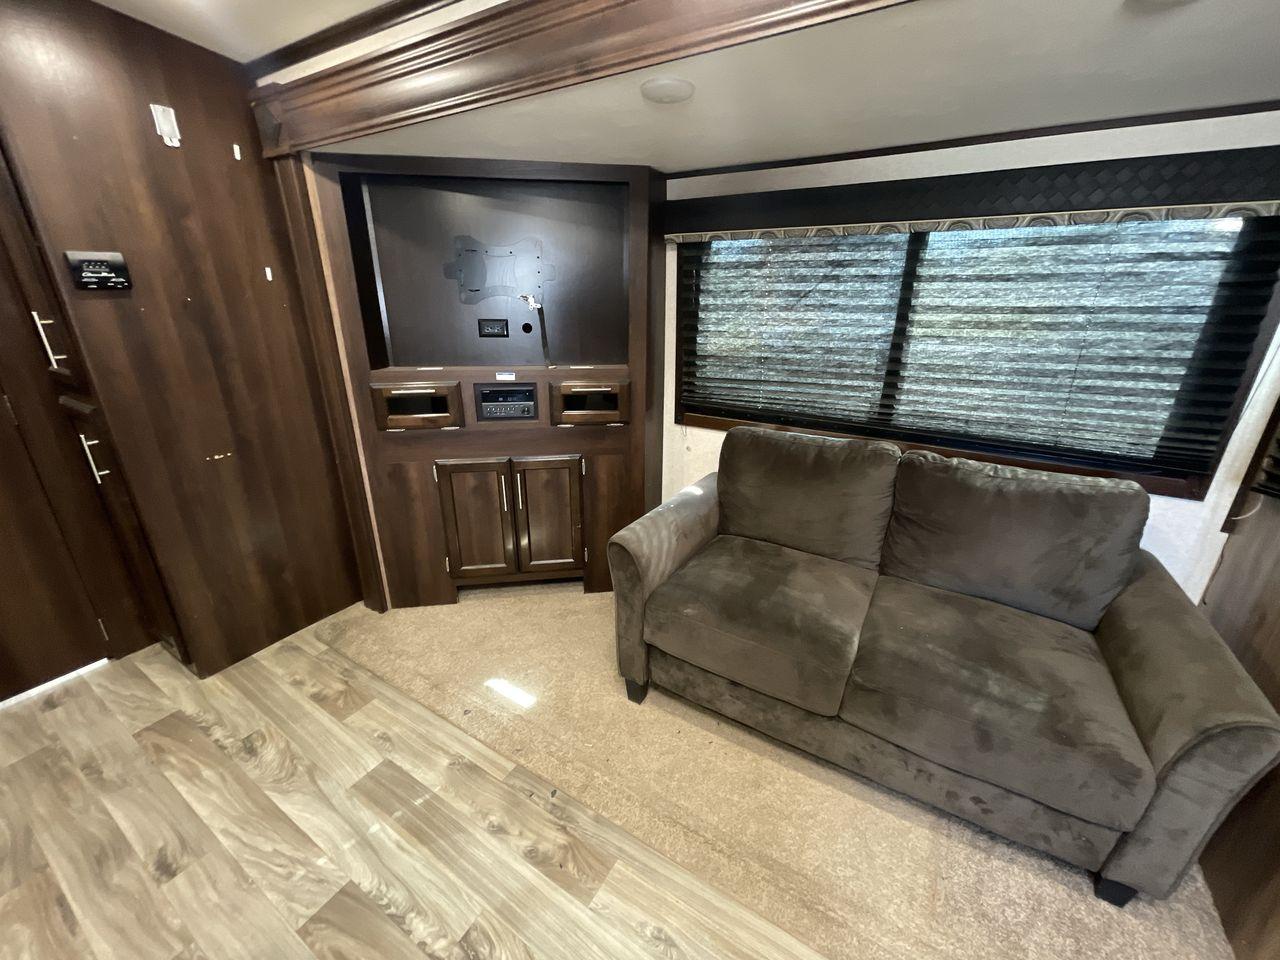 2018 WHITE JAYCO JAY FLIGHT 23MRB (1UJBJ0BN5J1) , Length: 28.17 ft | Dry Weight: 5,560 lbs. | Gross Weight: 7,250 lbs. | Slides: 1 transmission, located at 4319 N Main Street, Cleburne, TX, 76033, (817) 221-0660, 32.435829, -97.384178 - The 2018 Jayco Jay Flight 23MRB is a travel trailer that encapsulates both compactness and luxury for unparalleled camping experiences. Spanning 28 feet in length, this model boasts a thoughtfully arranged interior featuring a single slide-out, seamlessly amplifying the living space. The Jay Flight - Photo #12